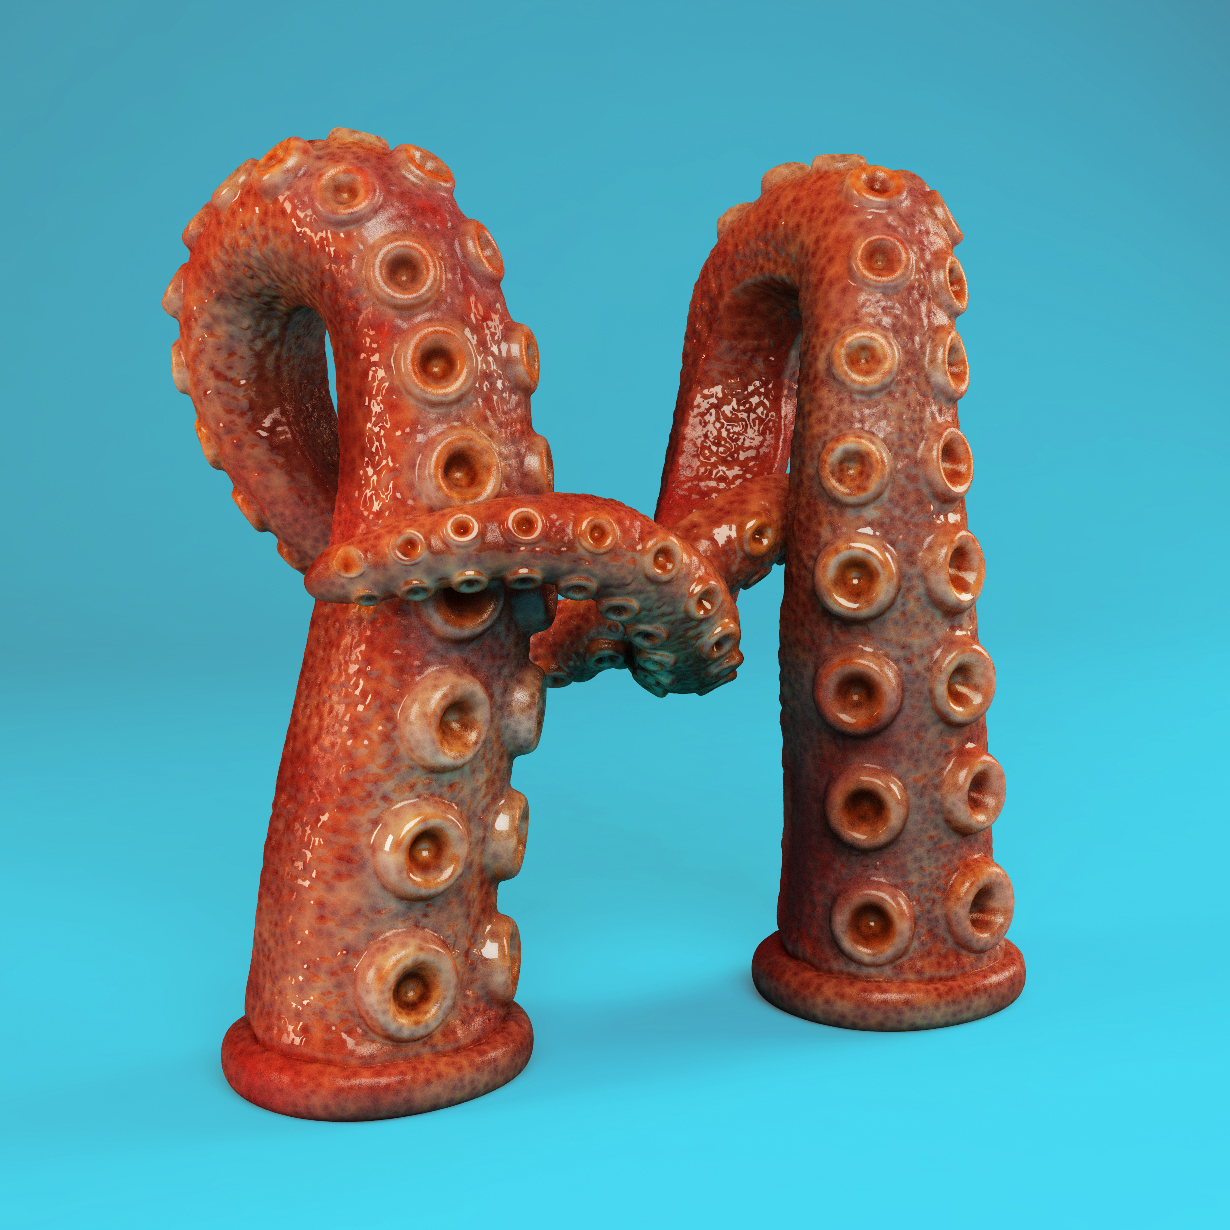 New-features-in-Cinema-4D (7)